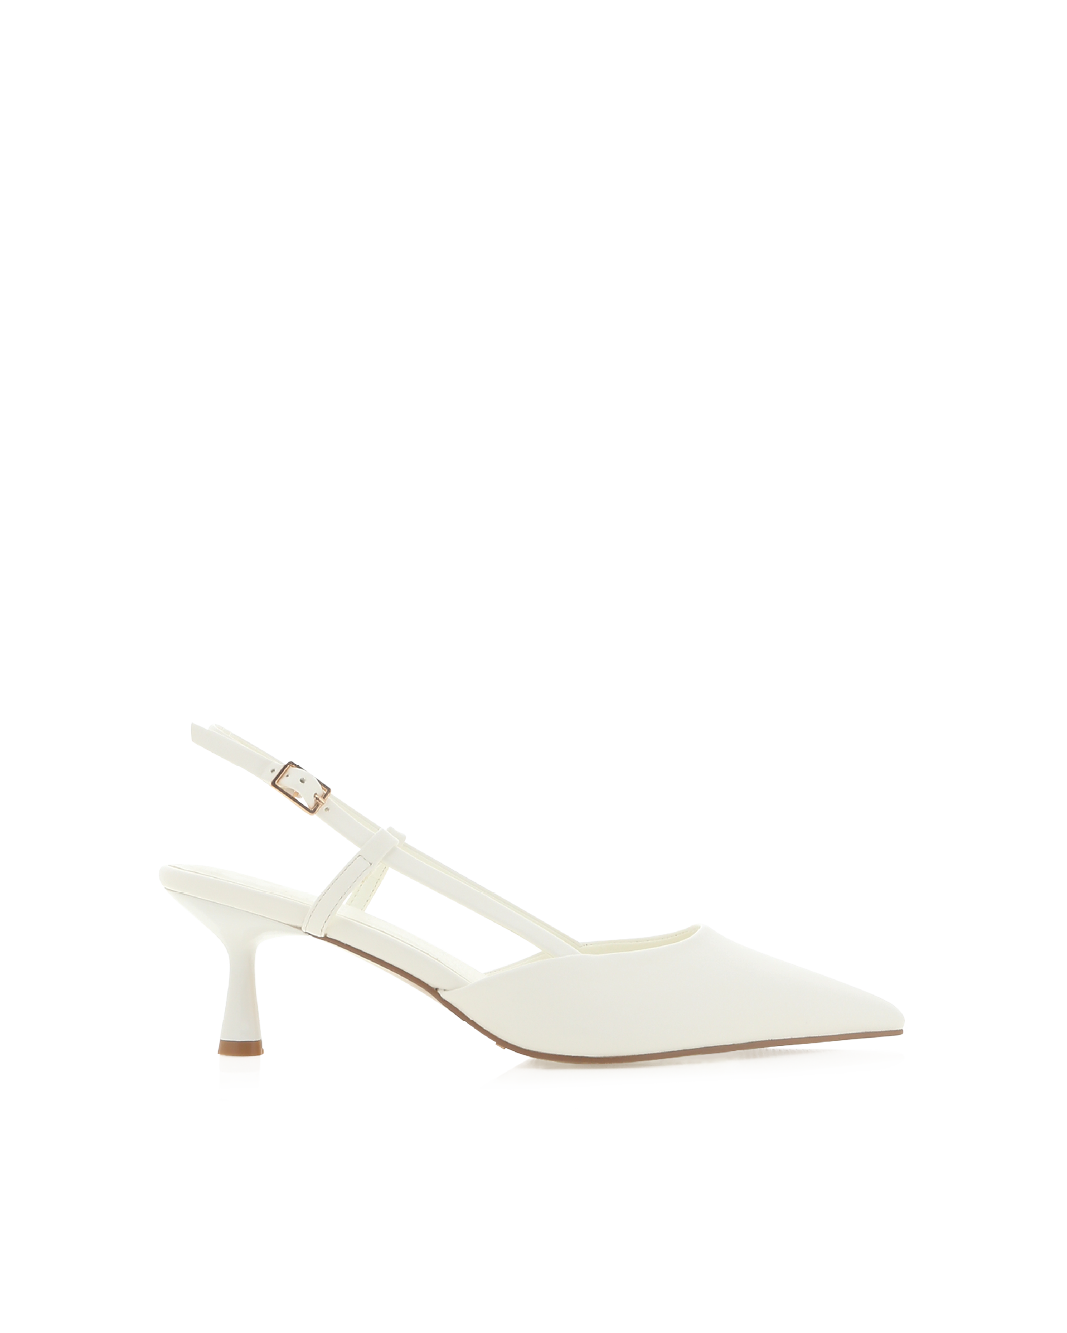 White Slingback Pumps - Satin Pearl Pumps - Pointed-Toe Pumps - Lulus